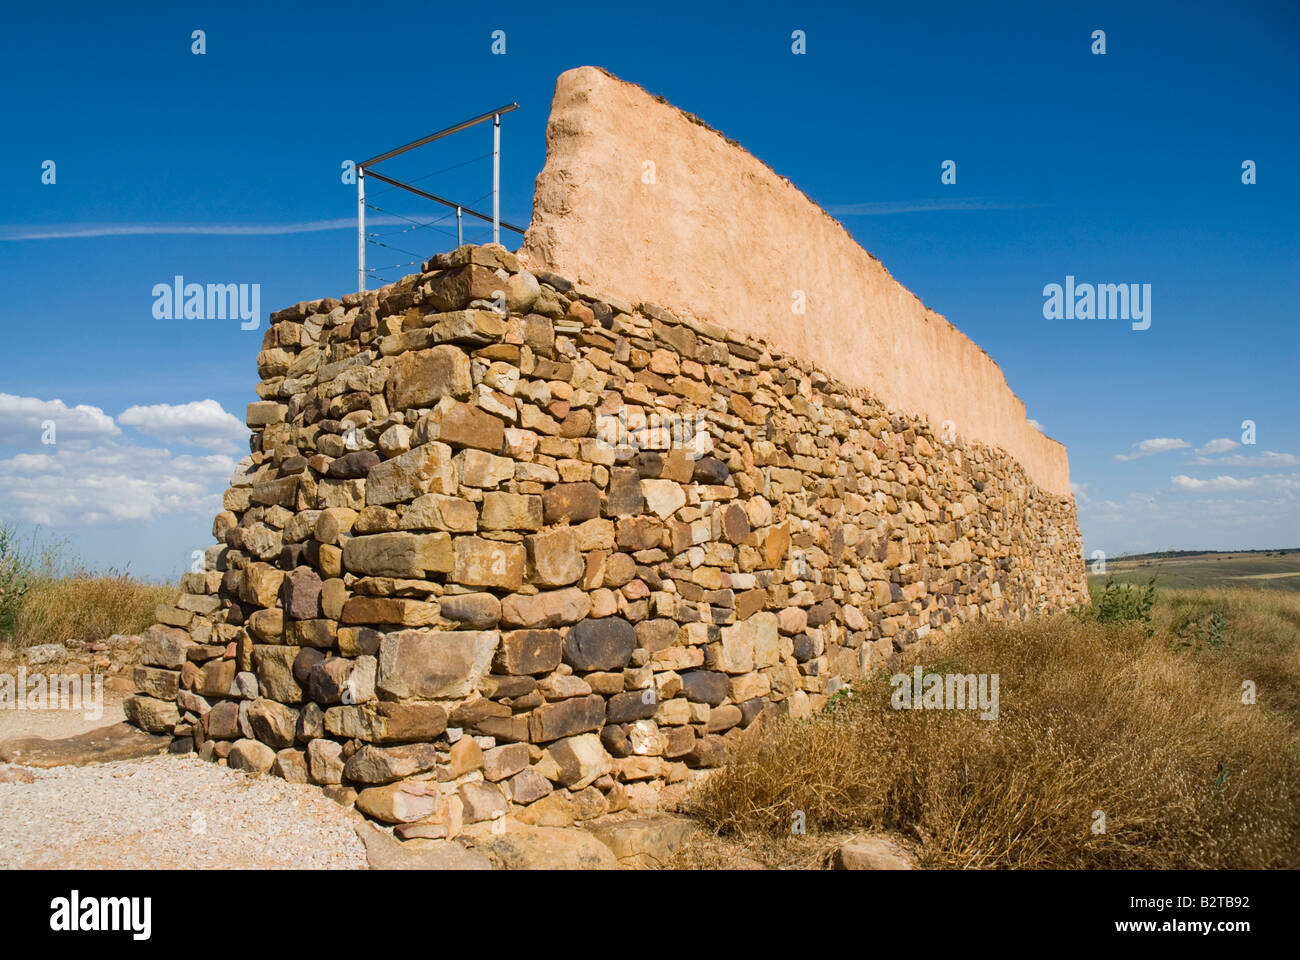 Reconstruction of walls in Ruins of NUMANTIA near Garray SORIA PROVINCE Castile and Leon region SPAIN Stock Photo